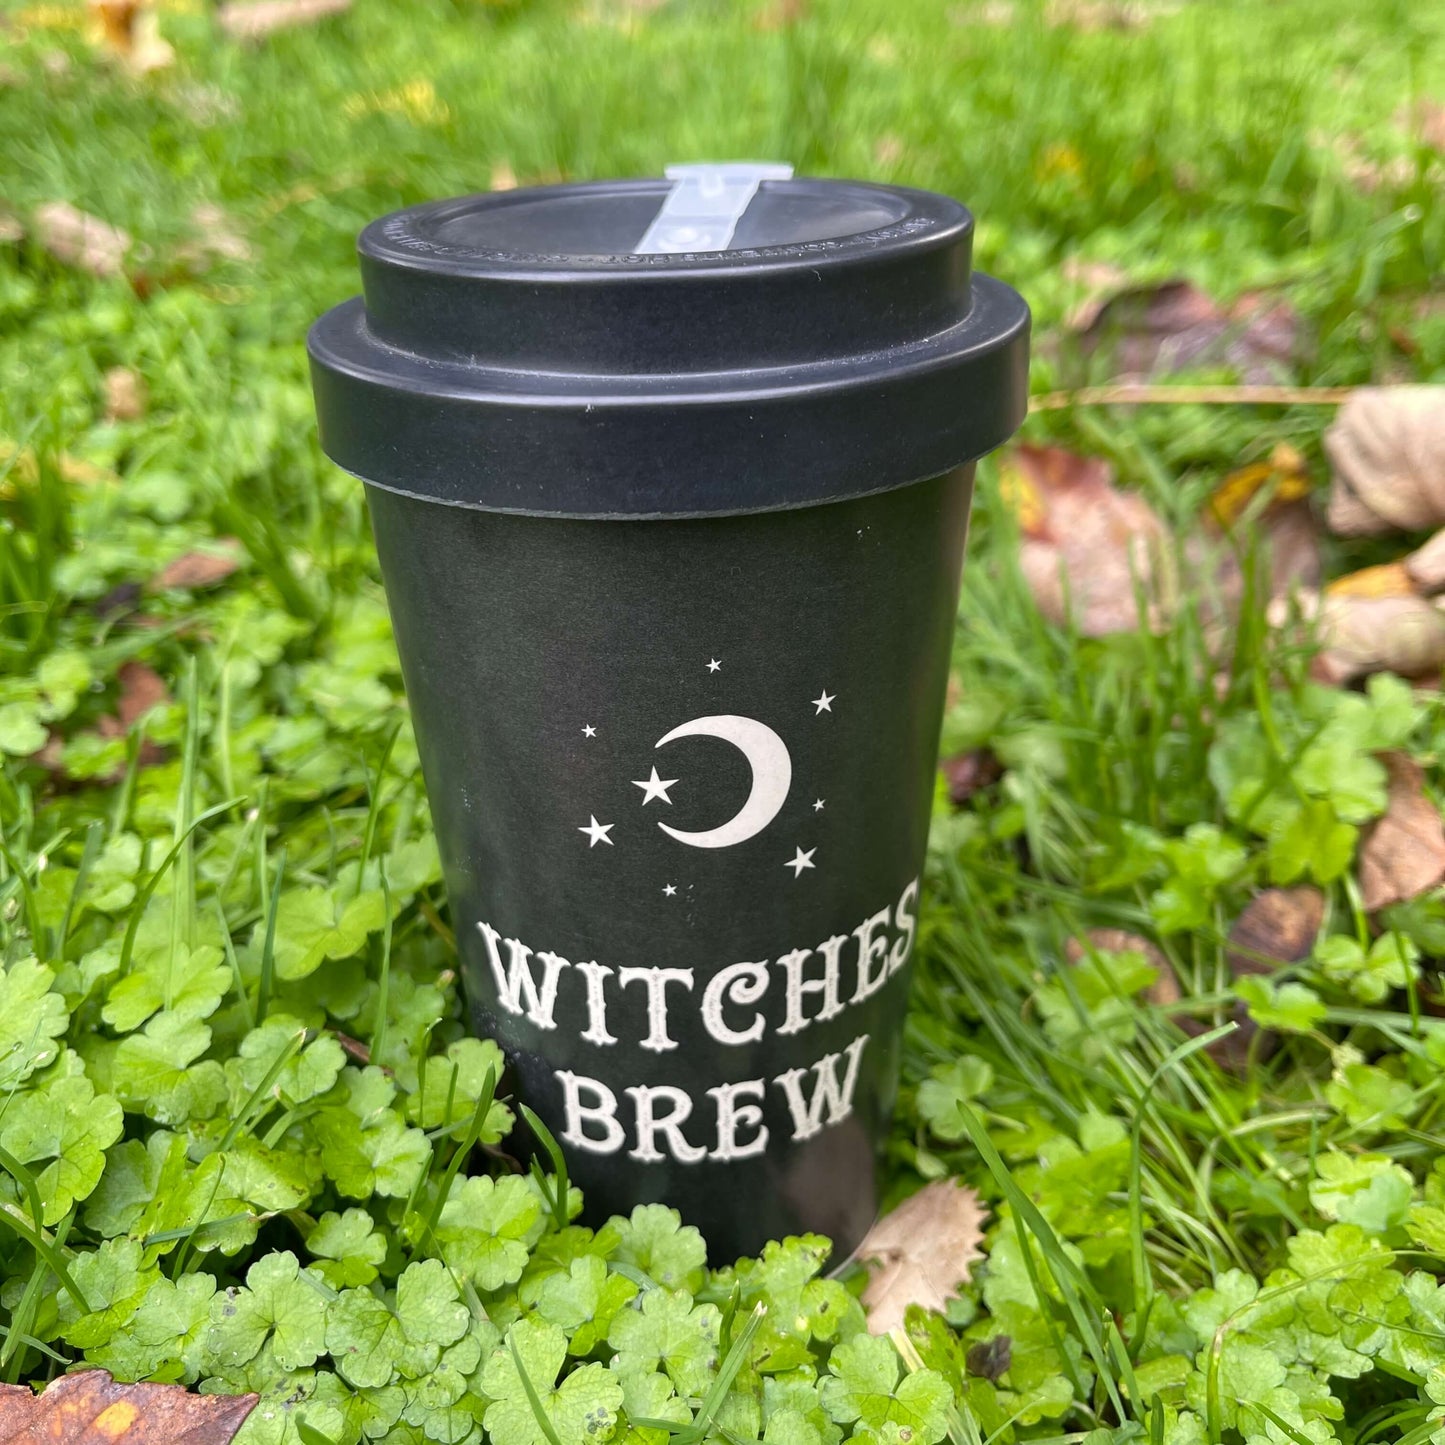 Black Bamboo Eco Travel Mug with white font saying "Witches Brew" on it sitting in the grass.